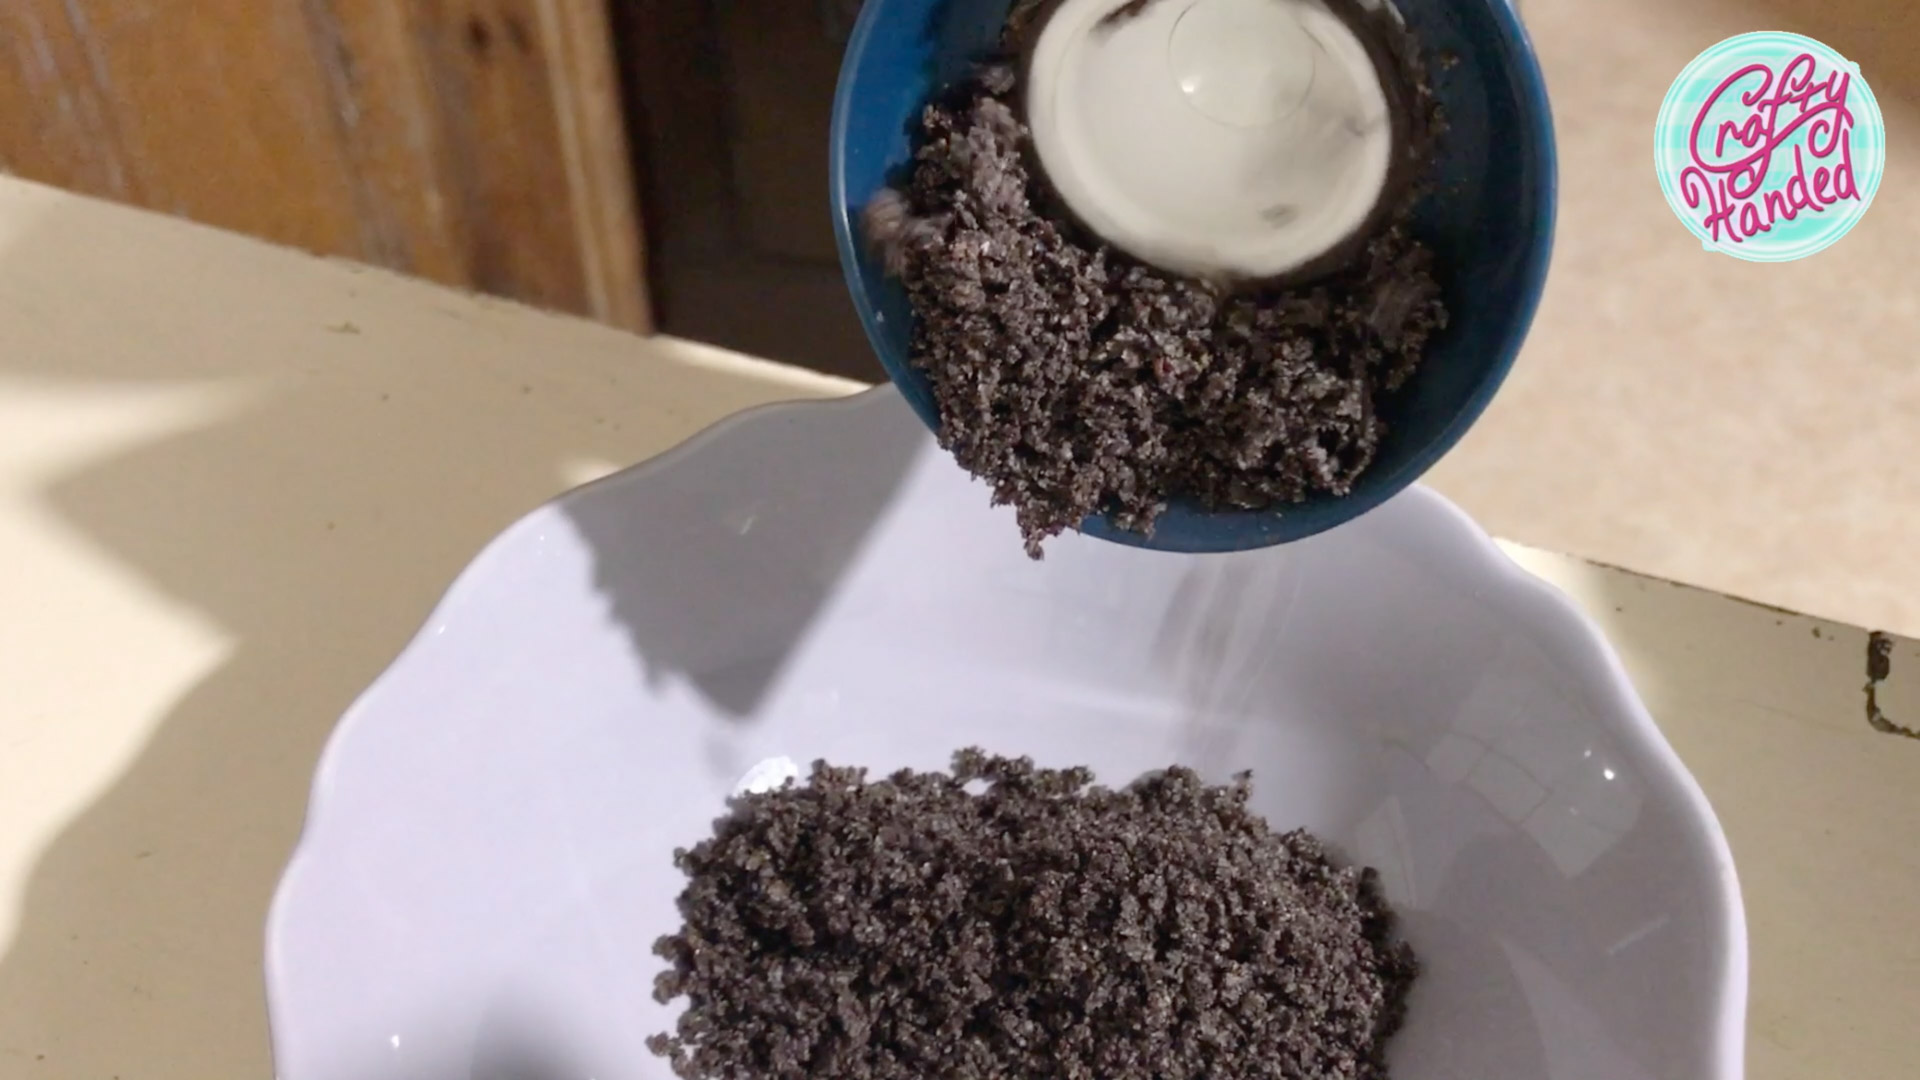 Grinding mill with poppy seeds